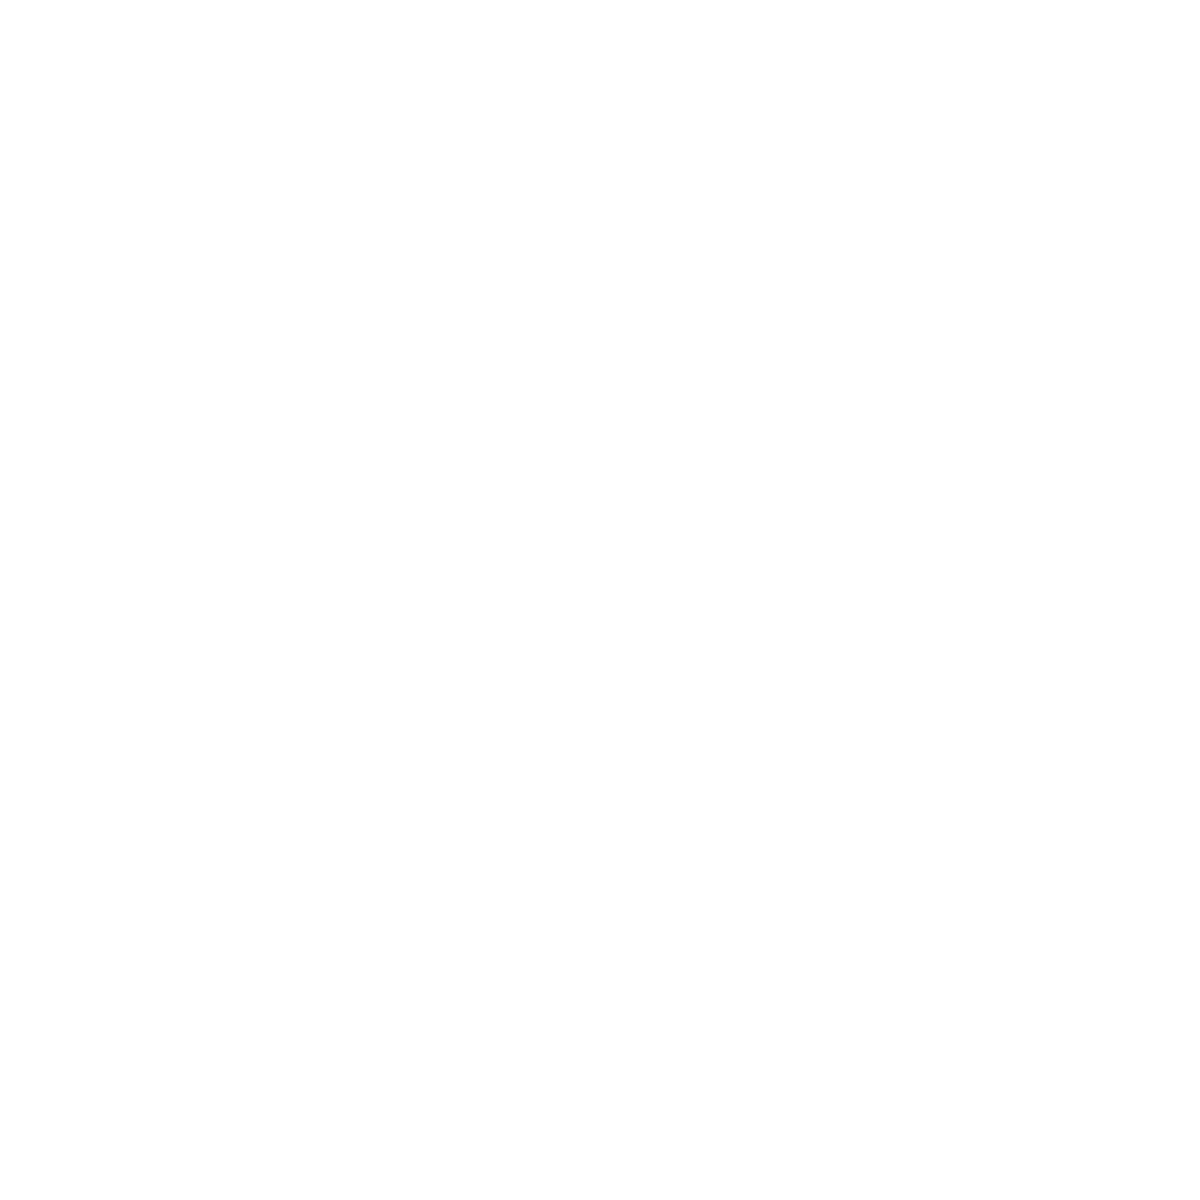 An icon of a heart of fire